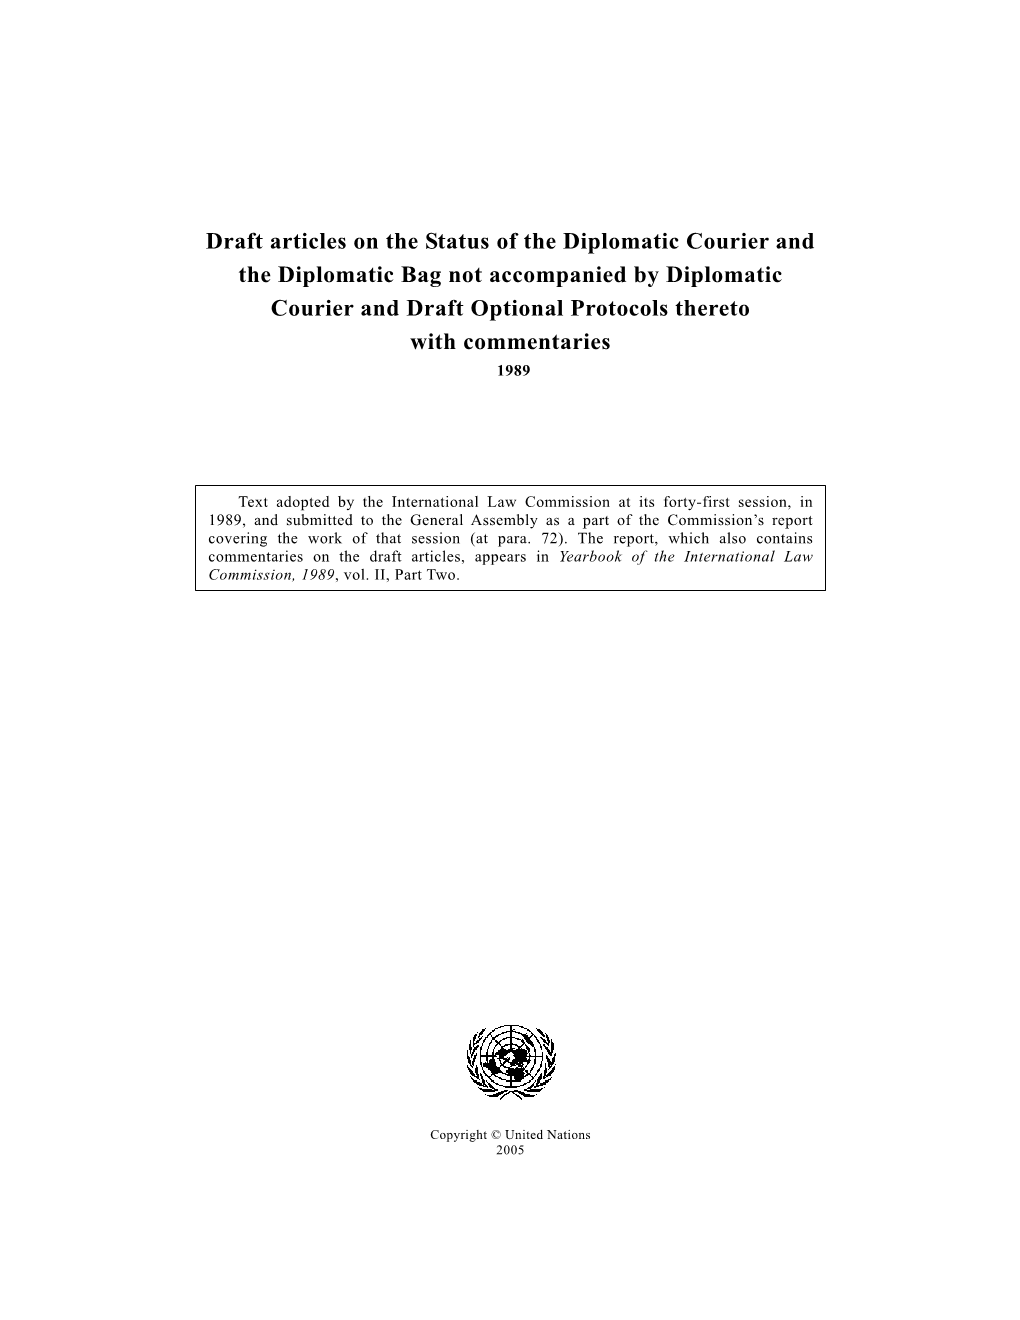 Draft Articles on the Status of the Diplomatic Courier and The